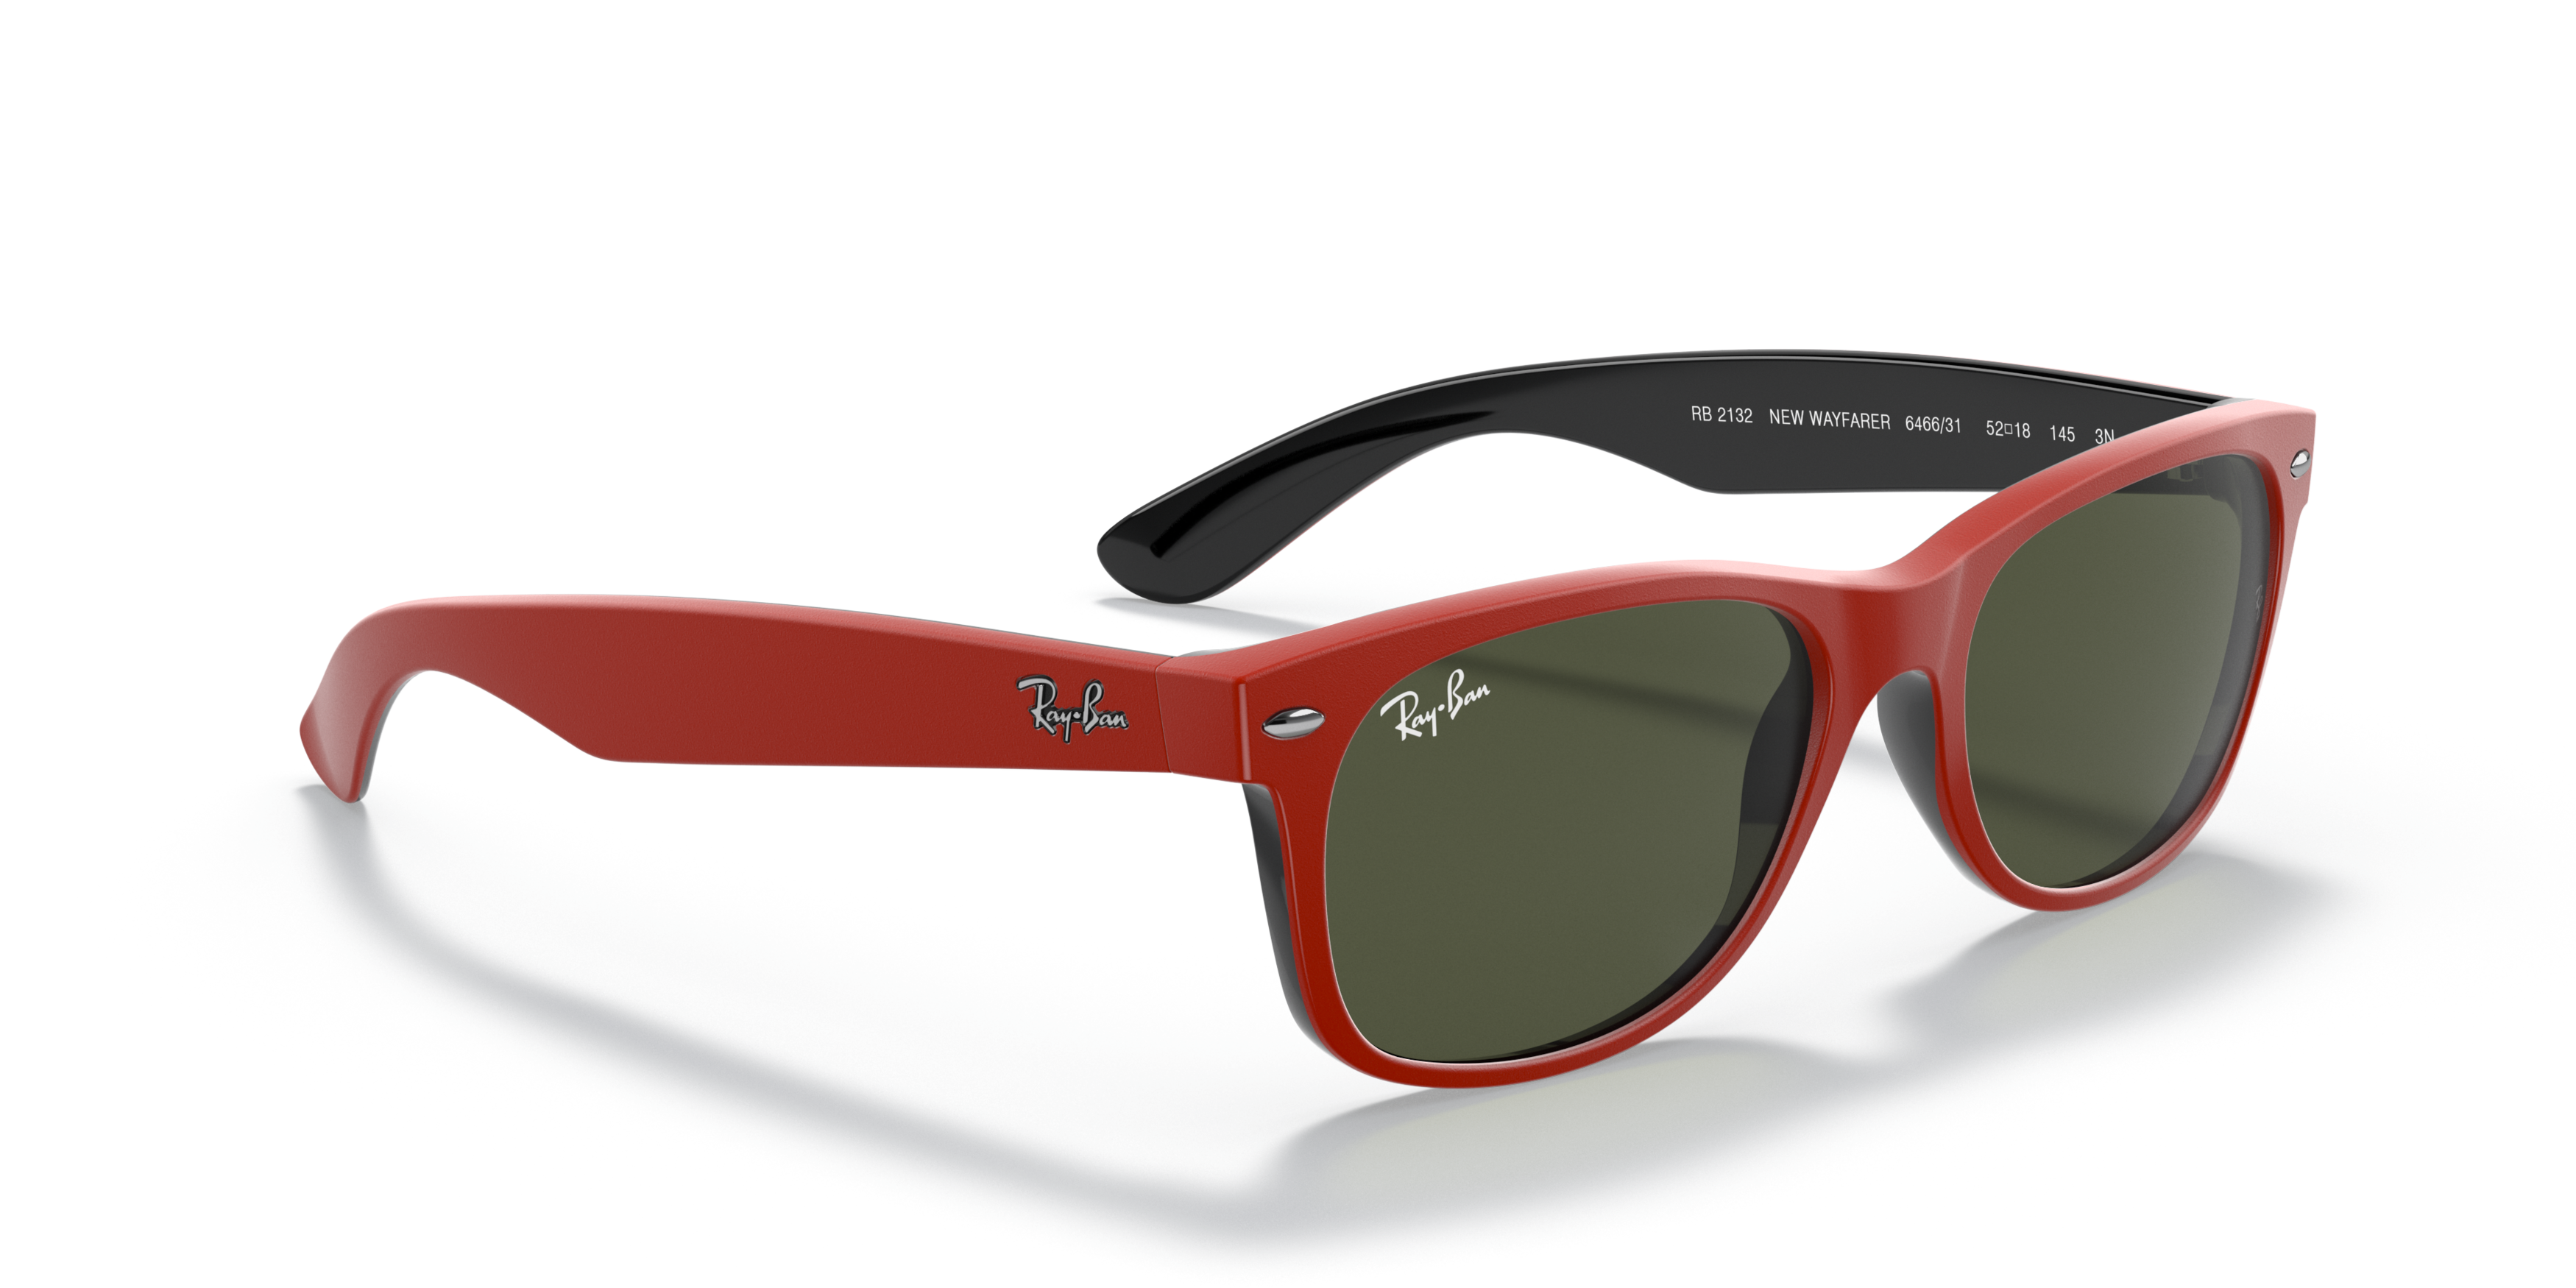 [products.image.angle_right01] Ray-Ban New Wayfarer Color Mix RB2132 646631